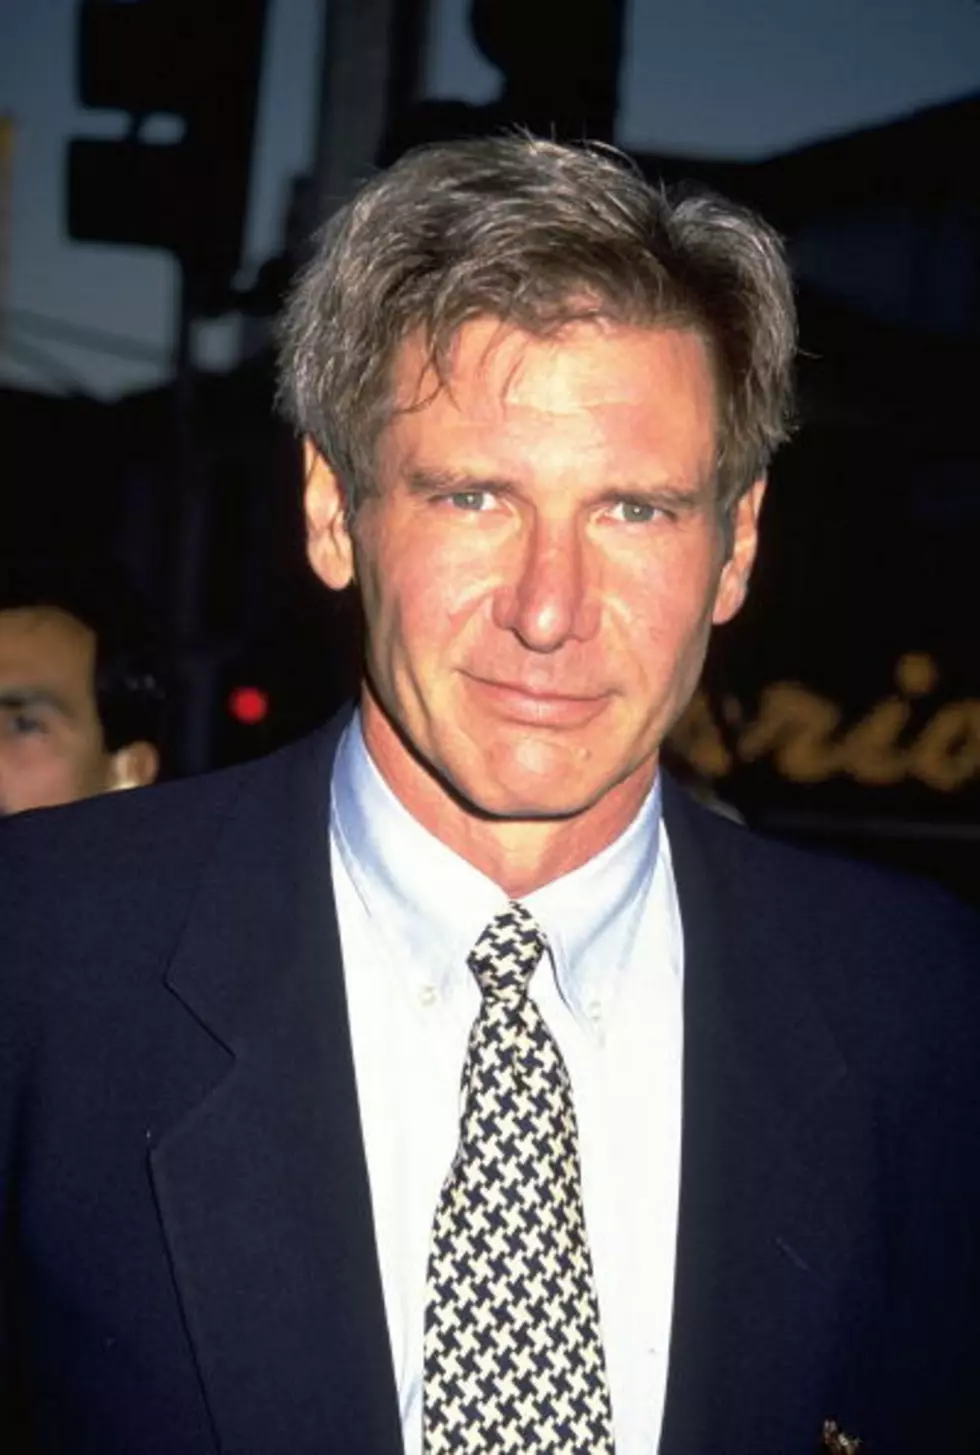 Is Harrison Ford Suffering from Dementia?